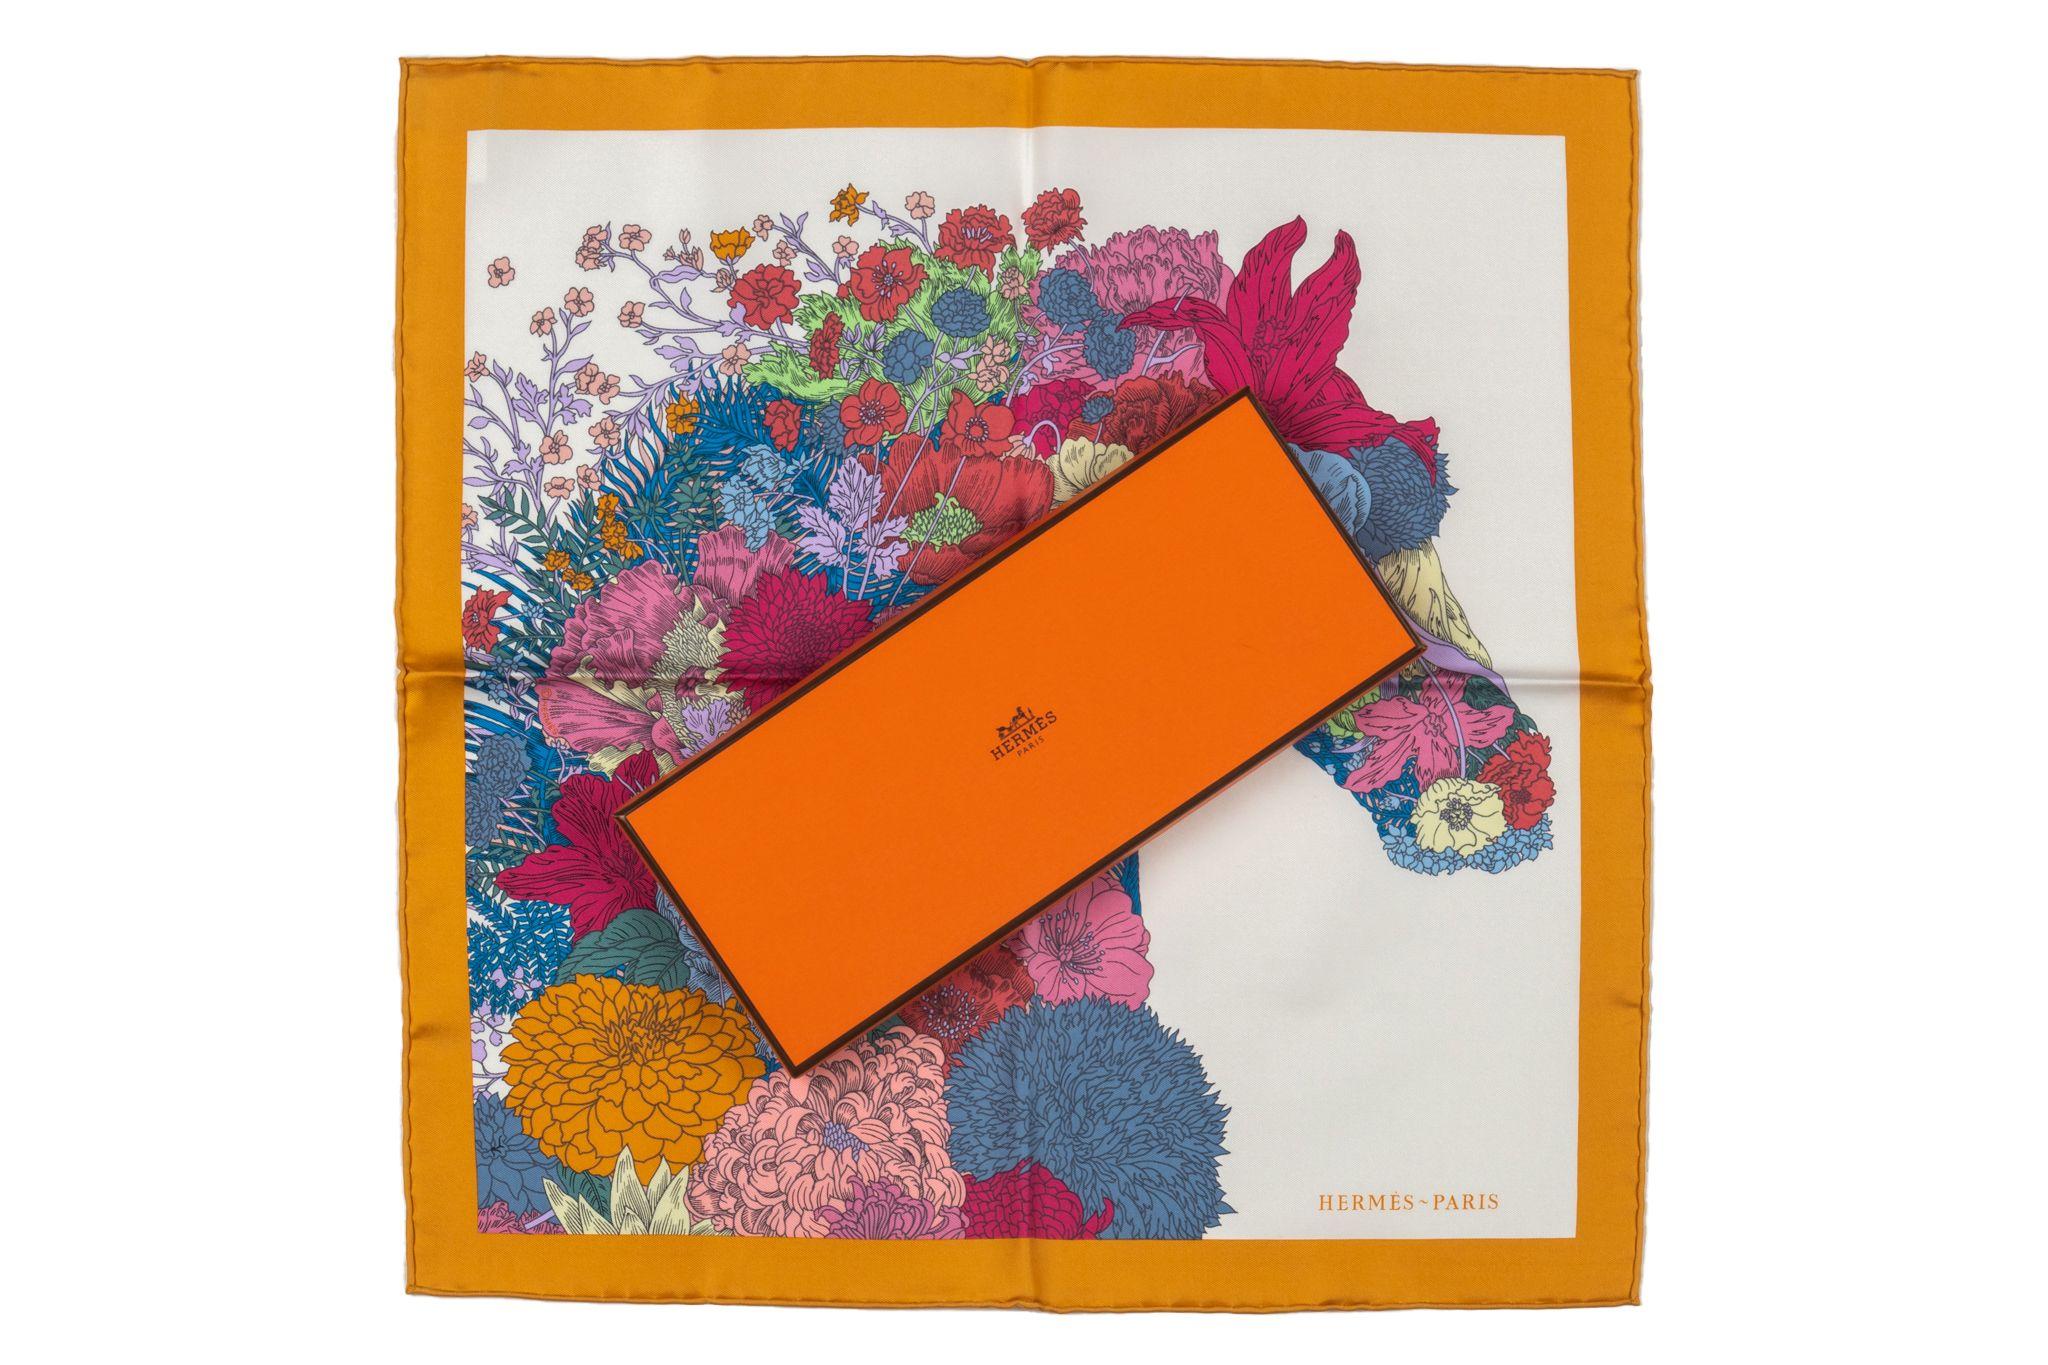 Hermes new Carré Gavroche Robe Regère with a orange frame and rolled edges. The print in the center is the head of a horse made of different flowers in multicolor. The piece comes with the original box.